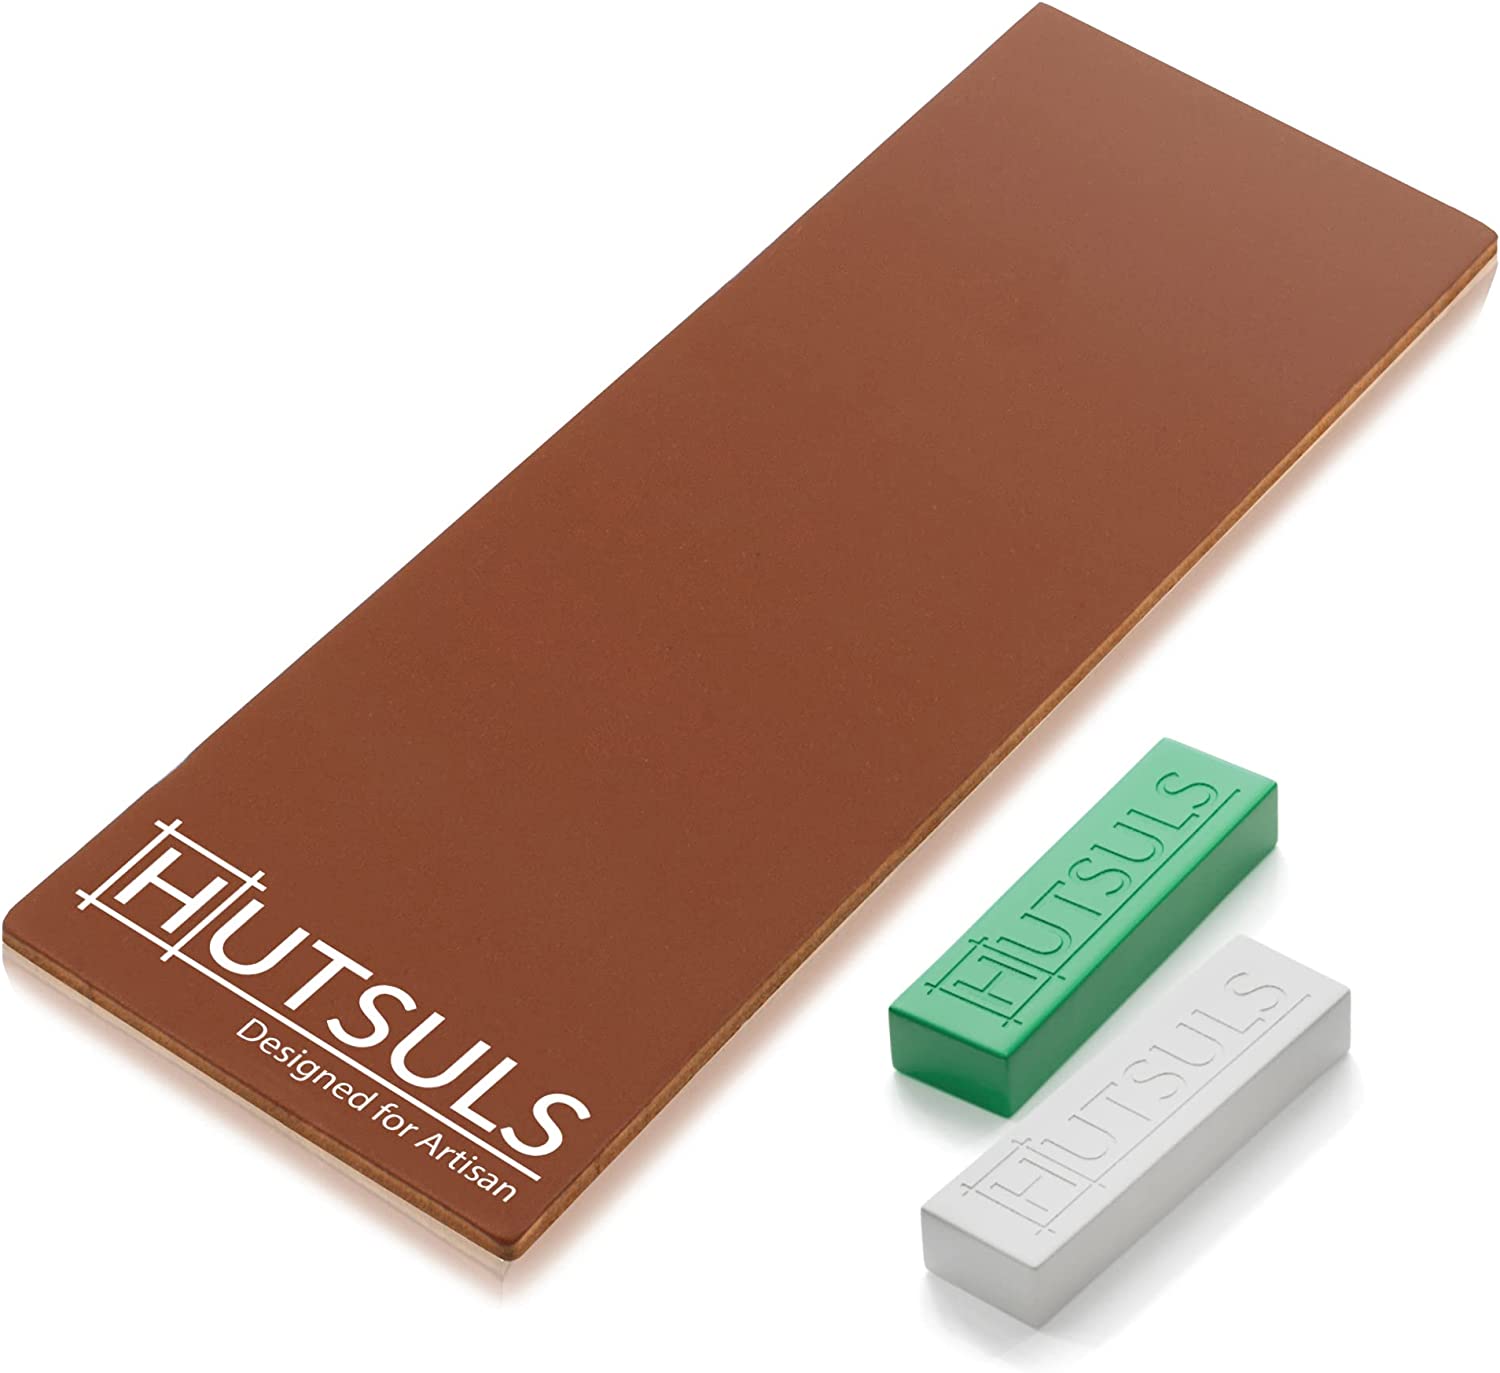 Hutsuls Black Leather Strop with Compound - Stropping Kit, Green